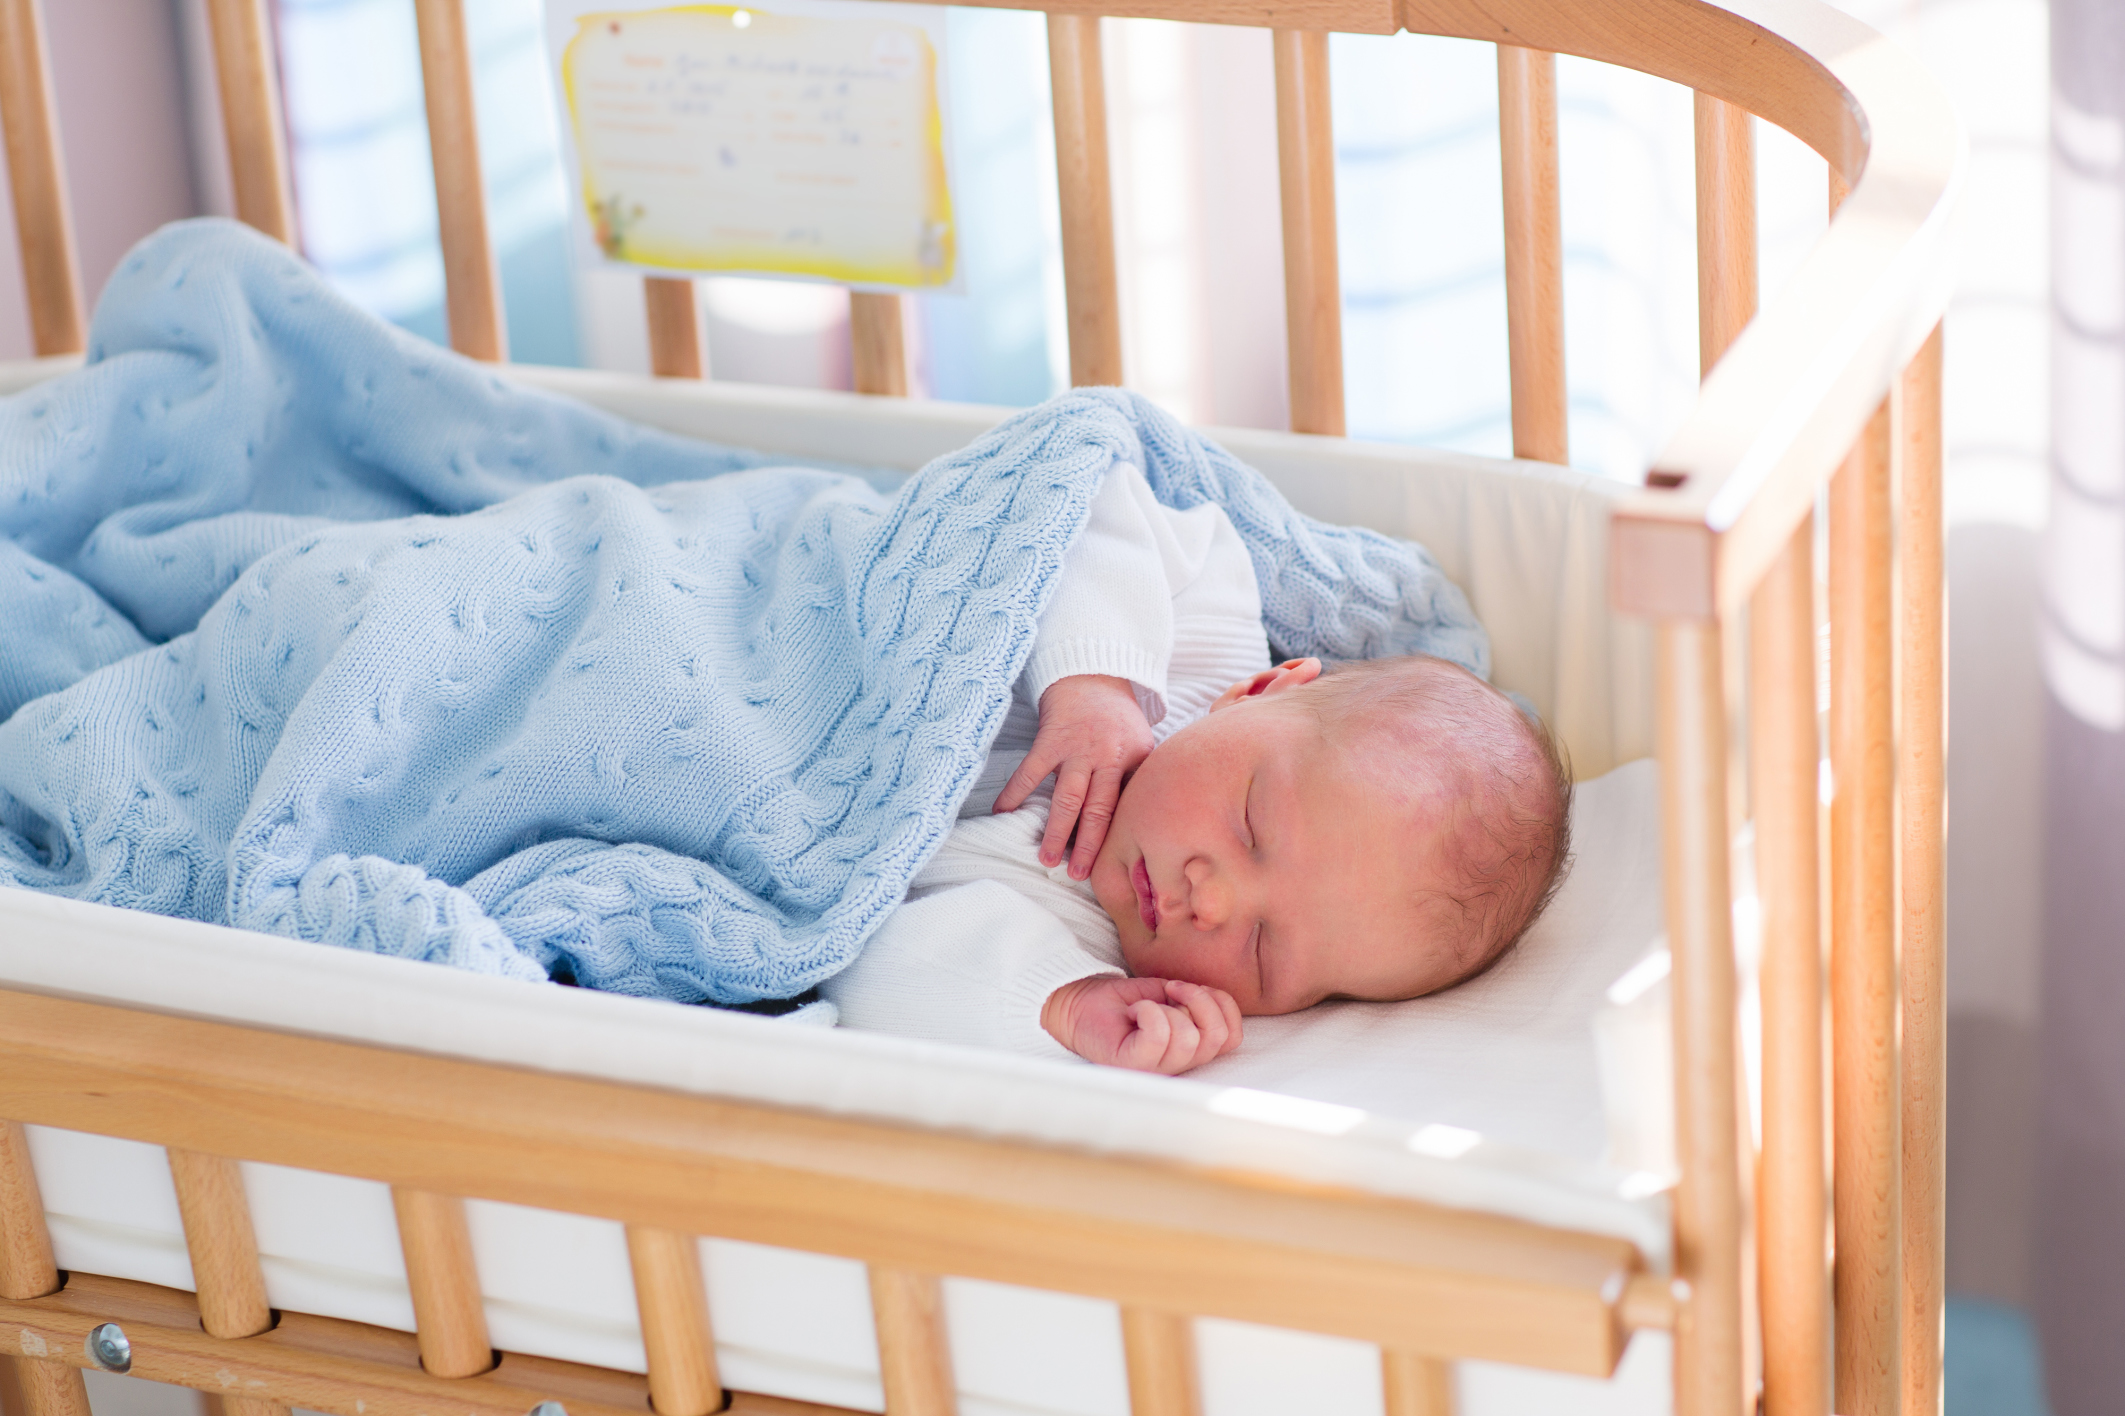 How To Elevate A Crib Mattress For Reflux